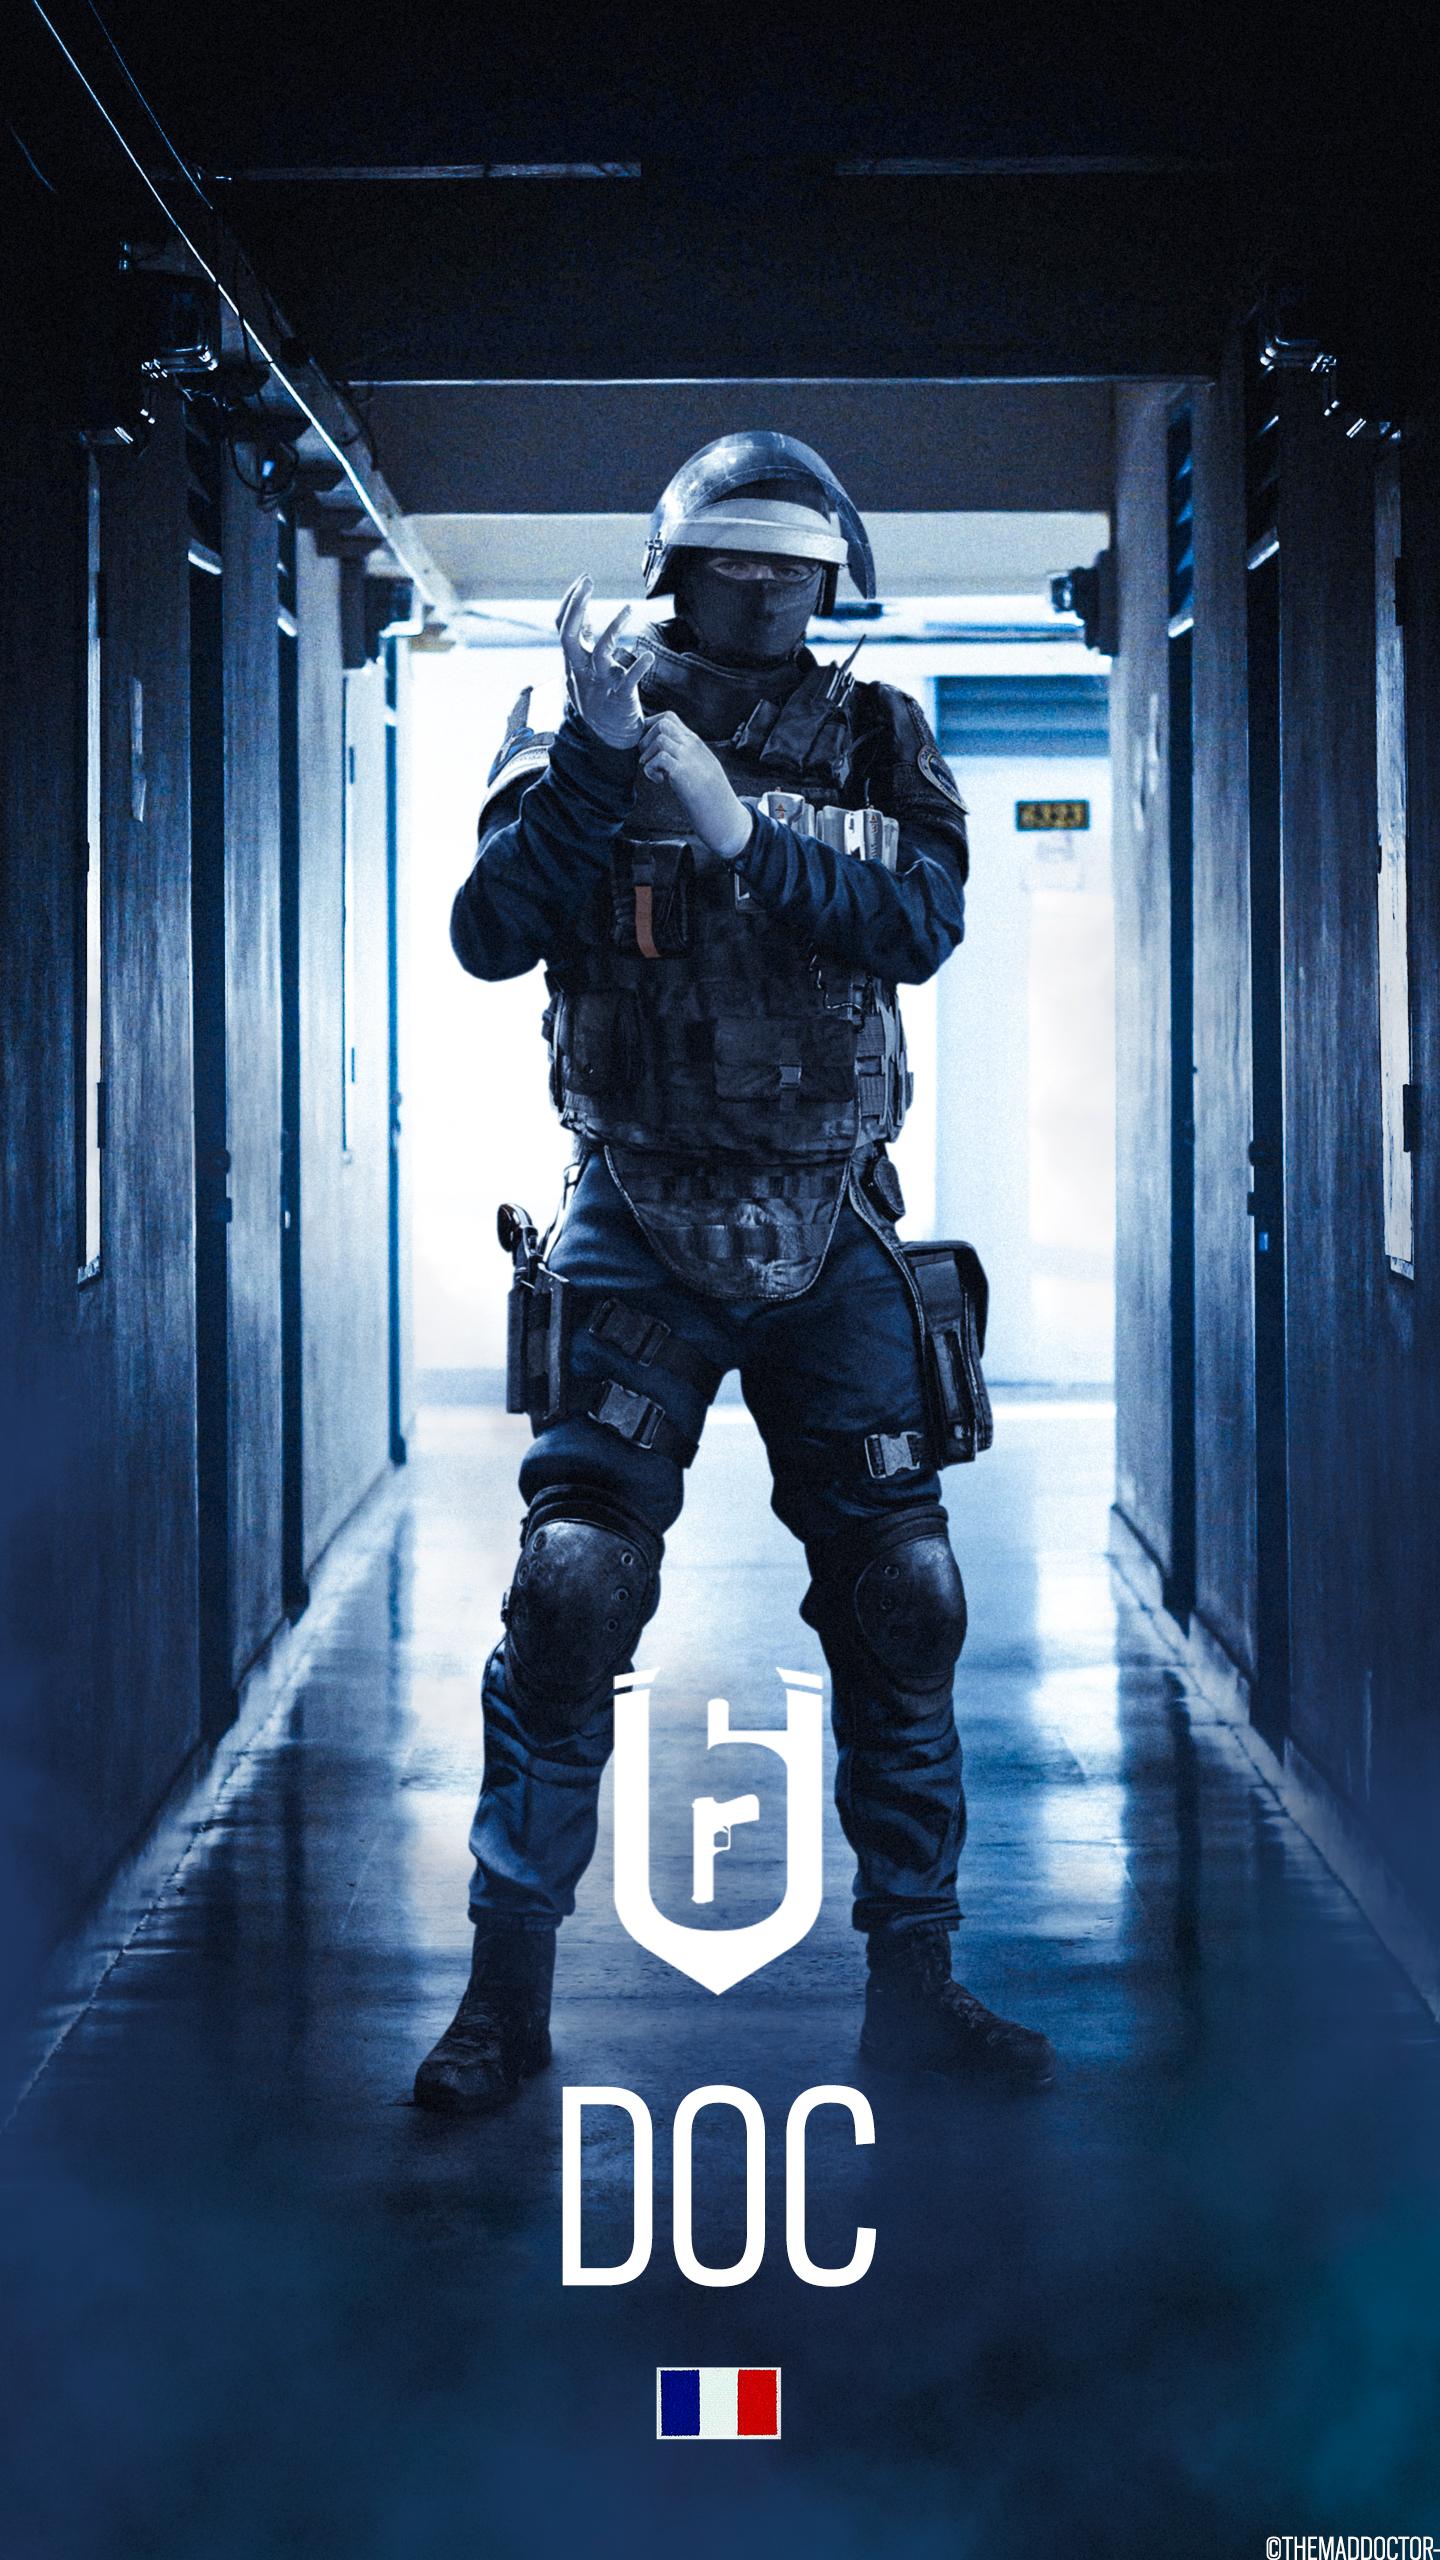 Here's the phone wallpaper for my main defending operator, Doc